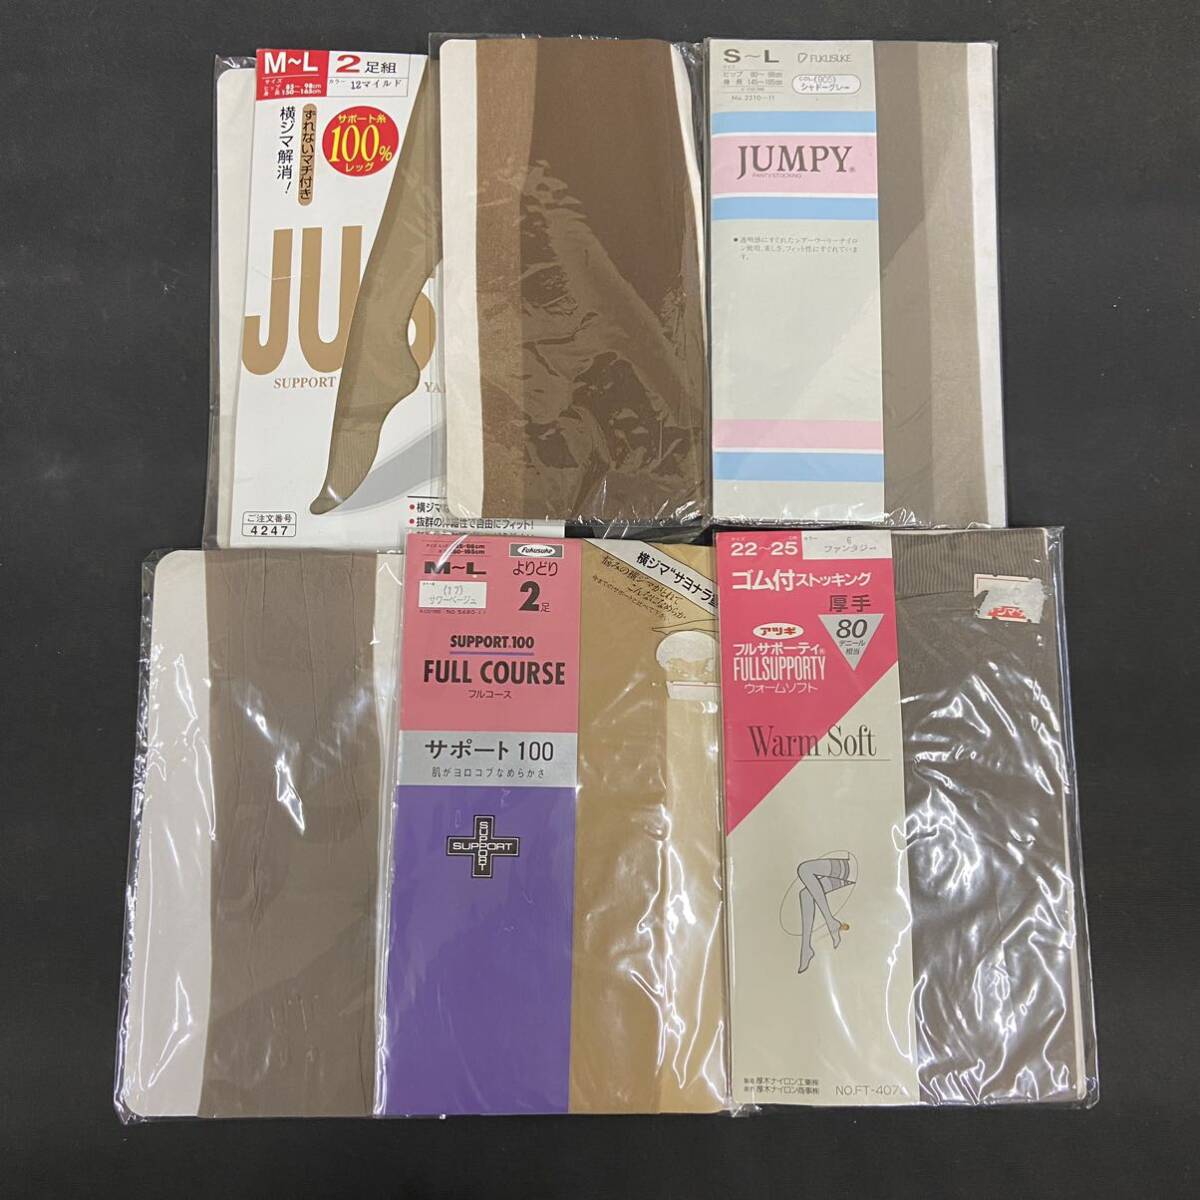 R1151[ stockings tights approximately 30 point together!] size various knee-high socks inner wear large amount lady's unused storage goods 